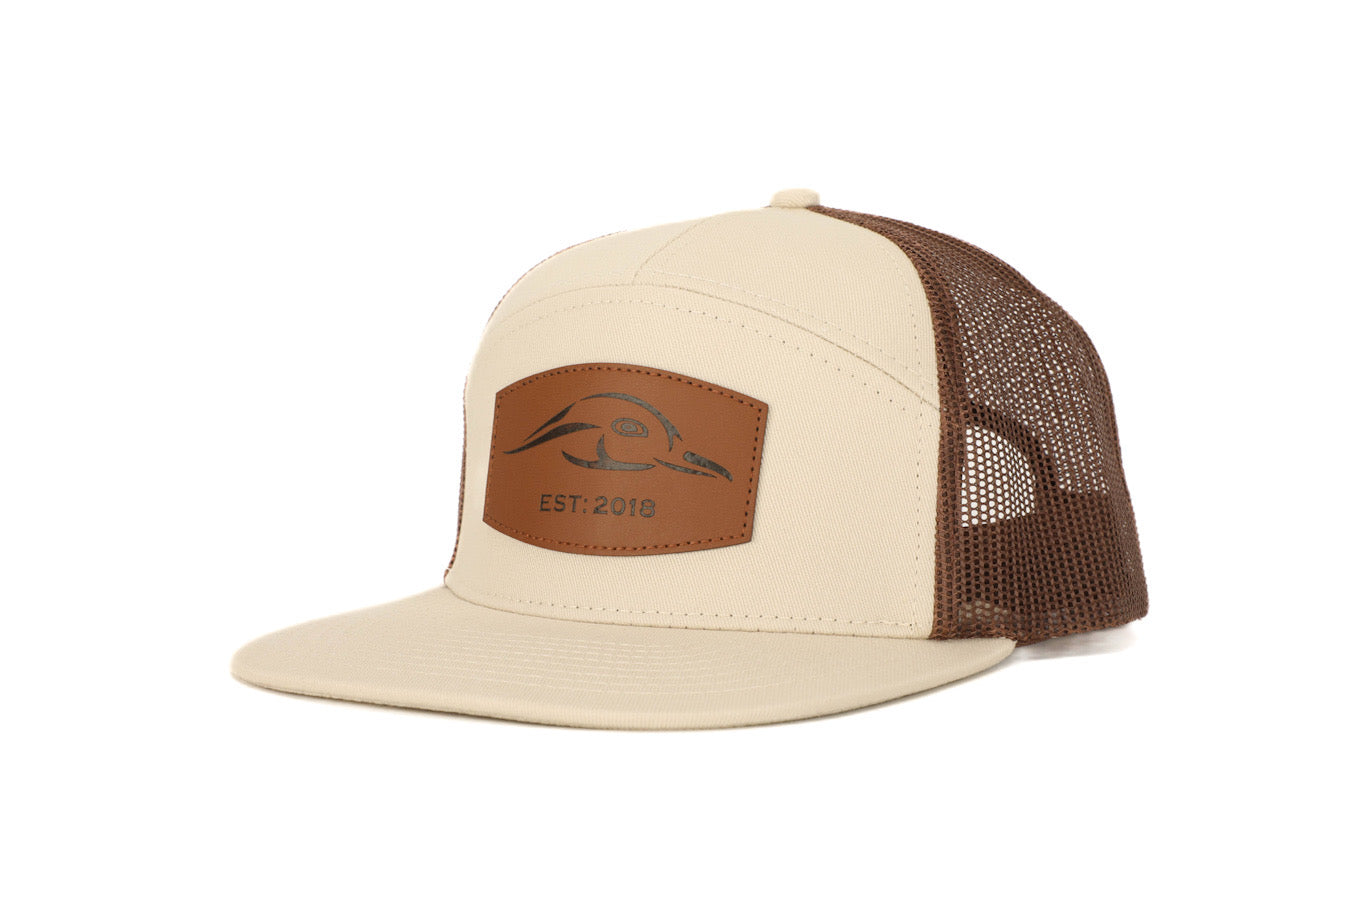 Youth Size AF Waterfowl Leather Patch 7 Panel Trucker Pale Khaki w/ Brown Mesh